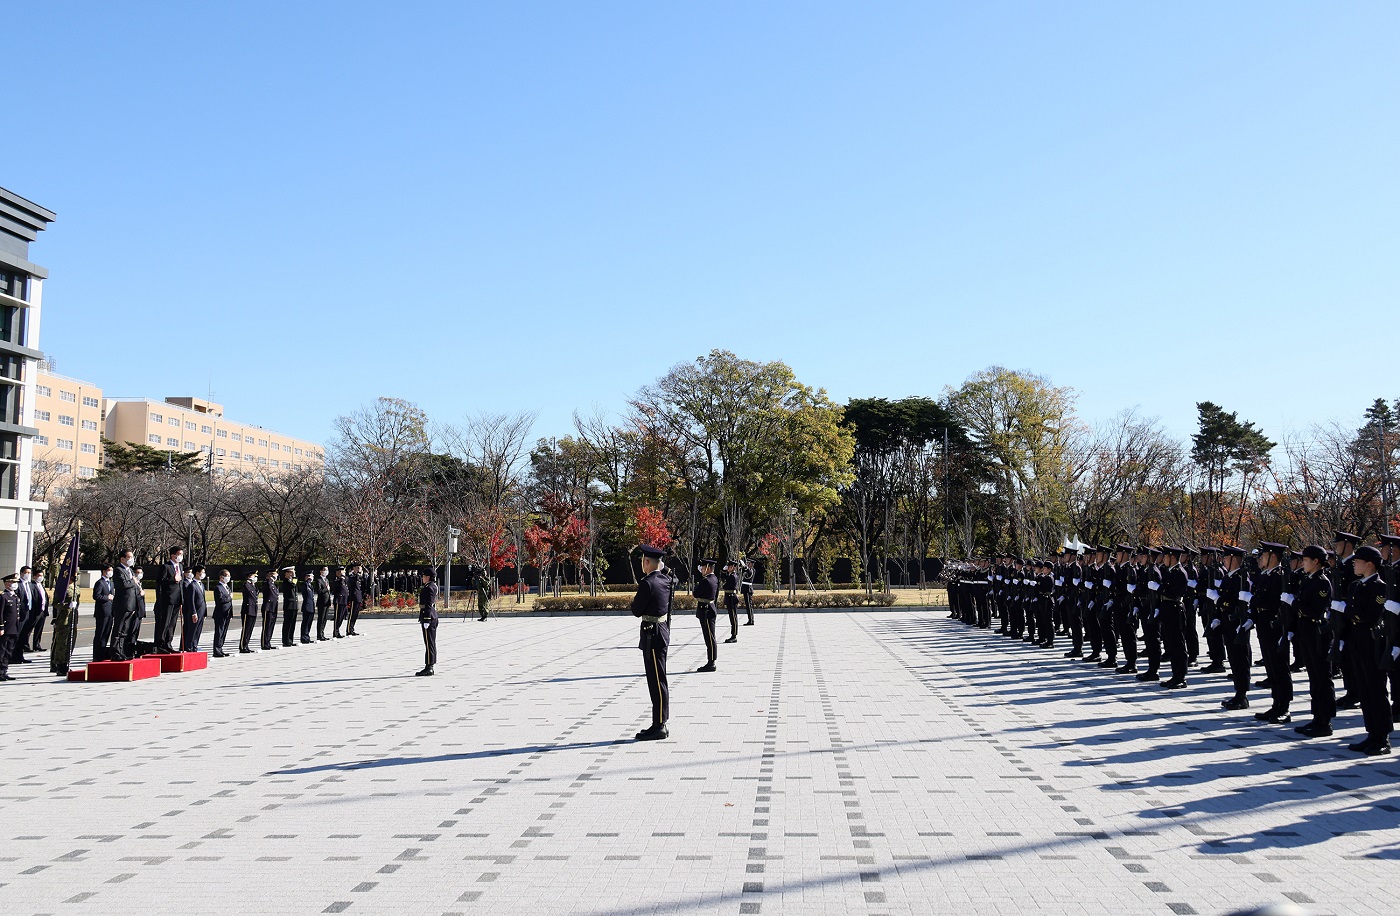 Photograph of the Prime Minister receiving a salute and attending a guard of honor ceremony (2)